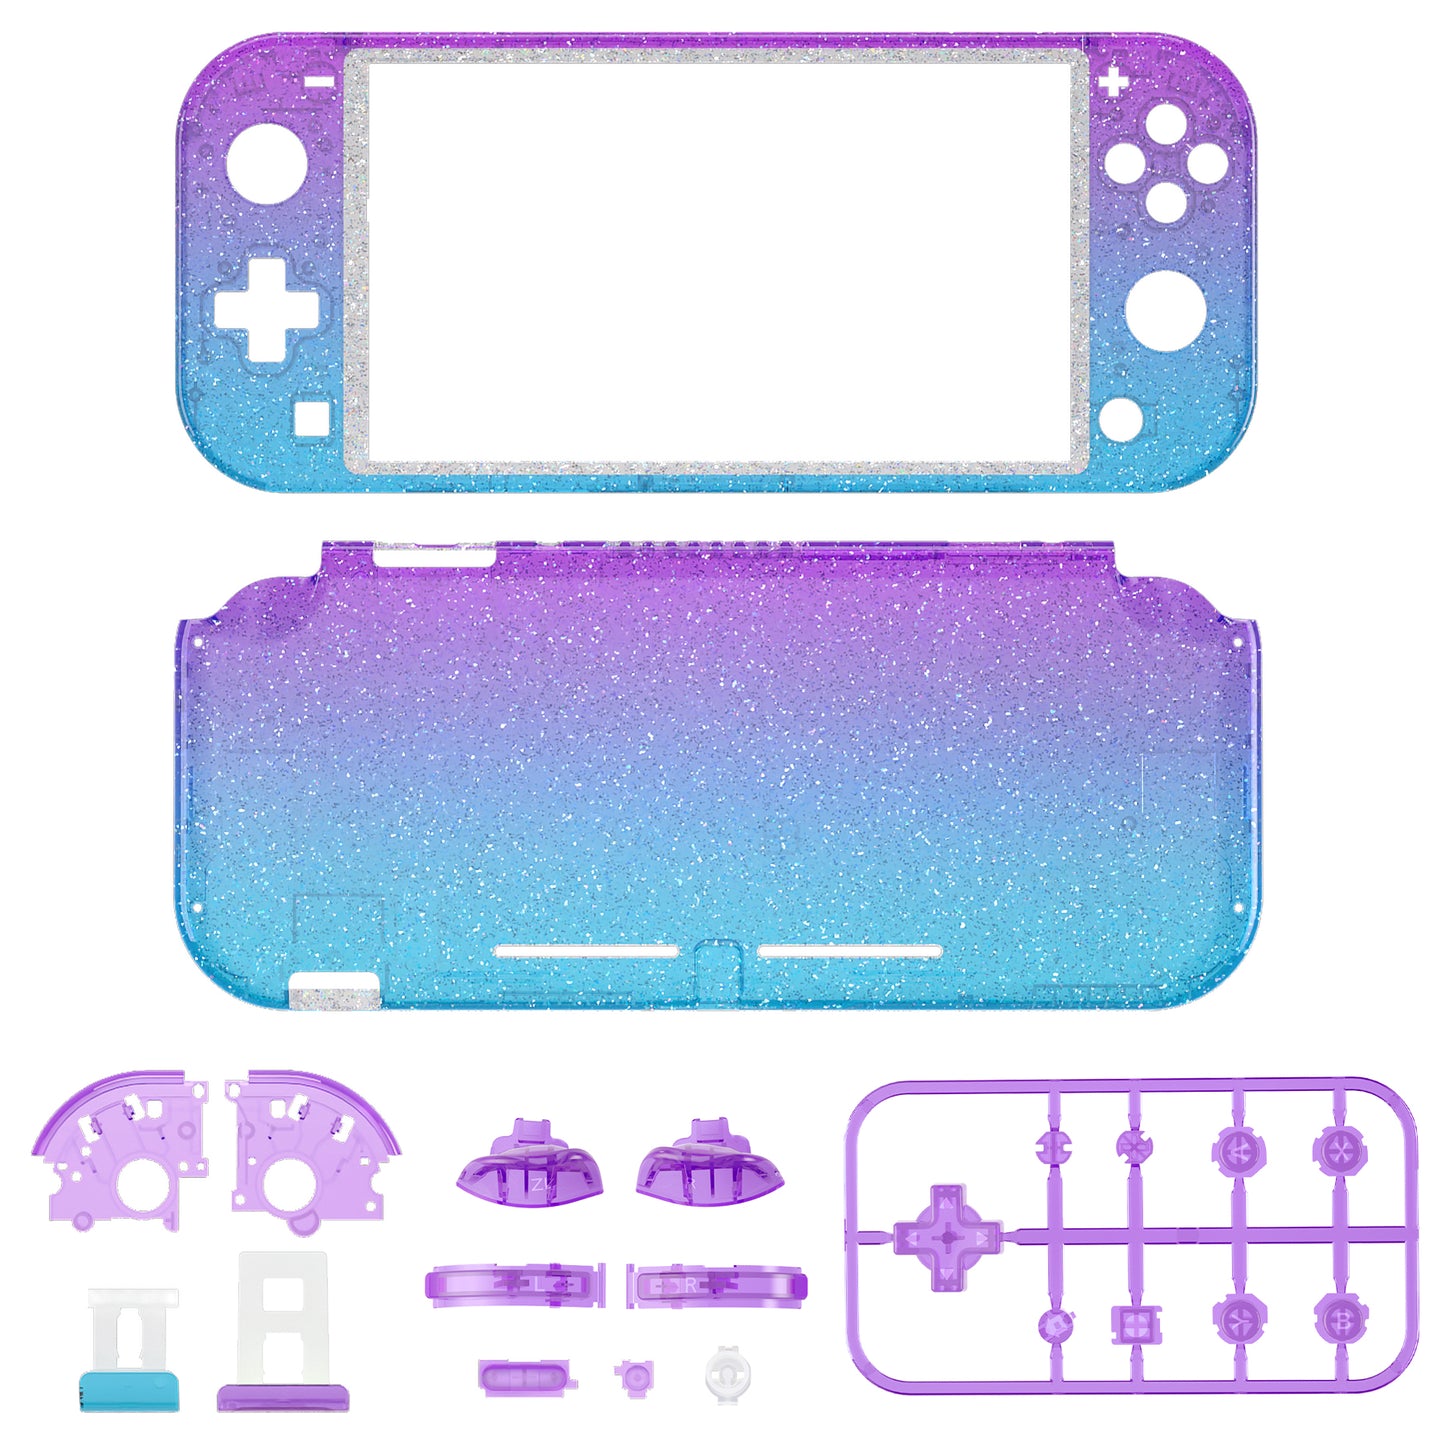 eXtremeRate Replacement Housing Shell for with Screen Protector for Nintendo Switch Lite - Glitter Gradient Translucent Bluebell & Blue eXtremeRate